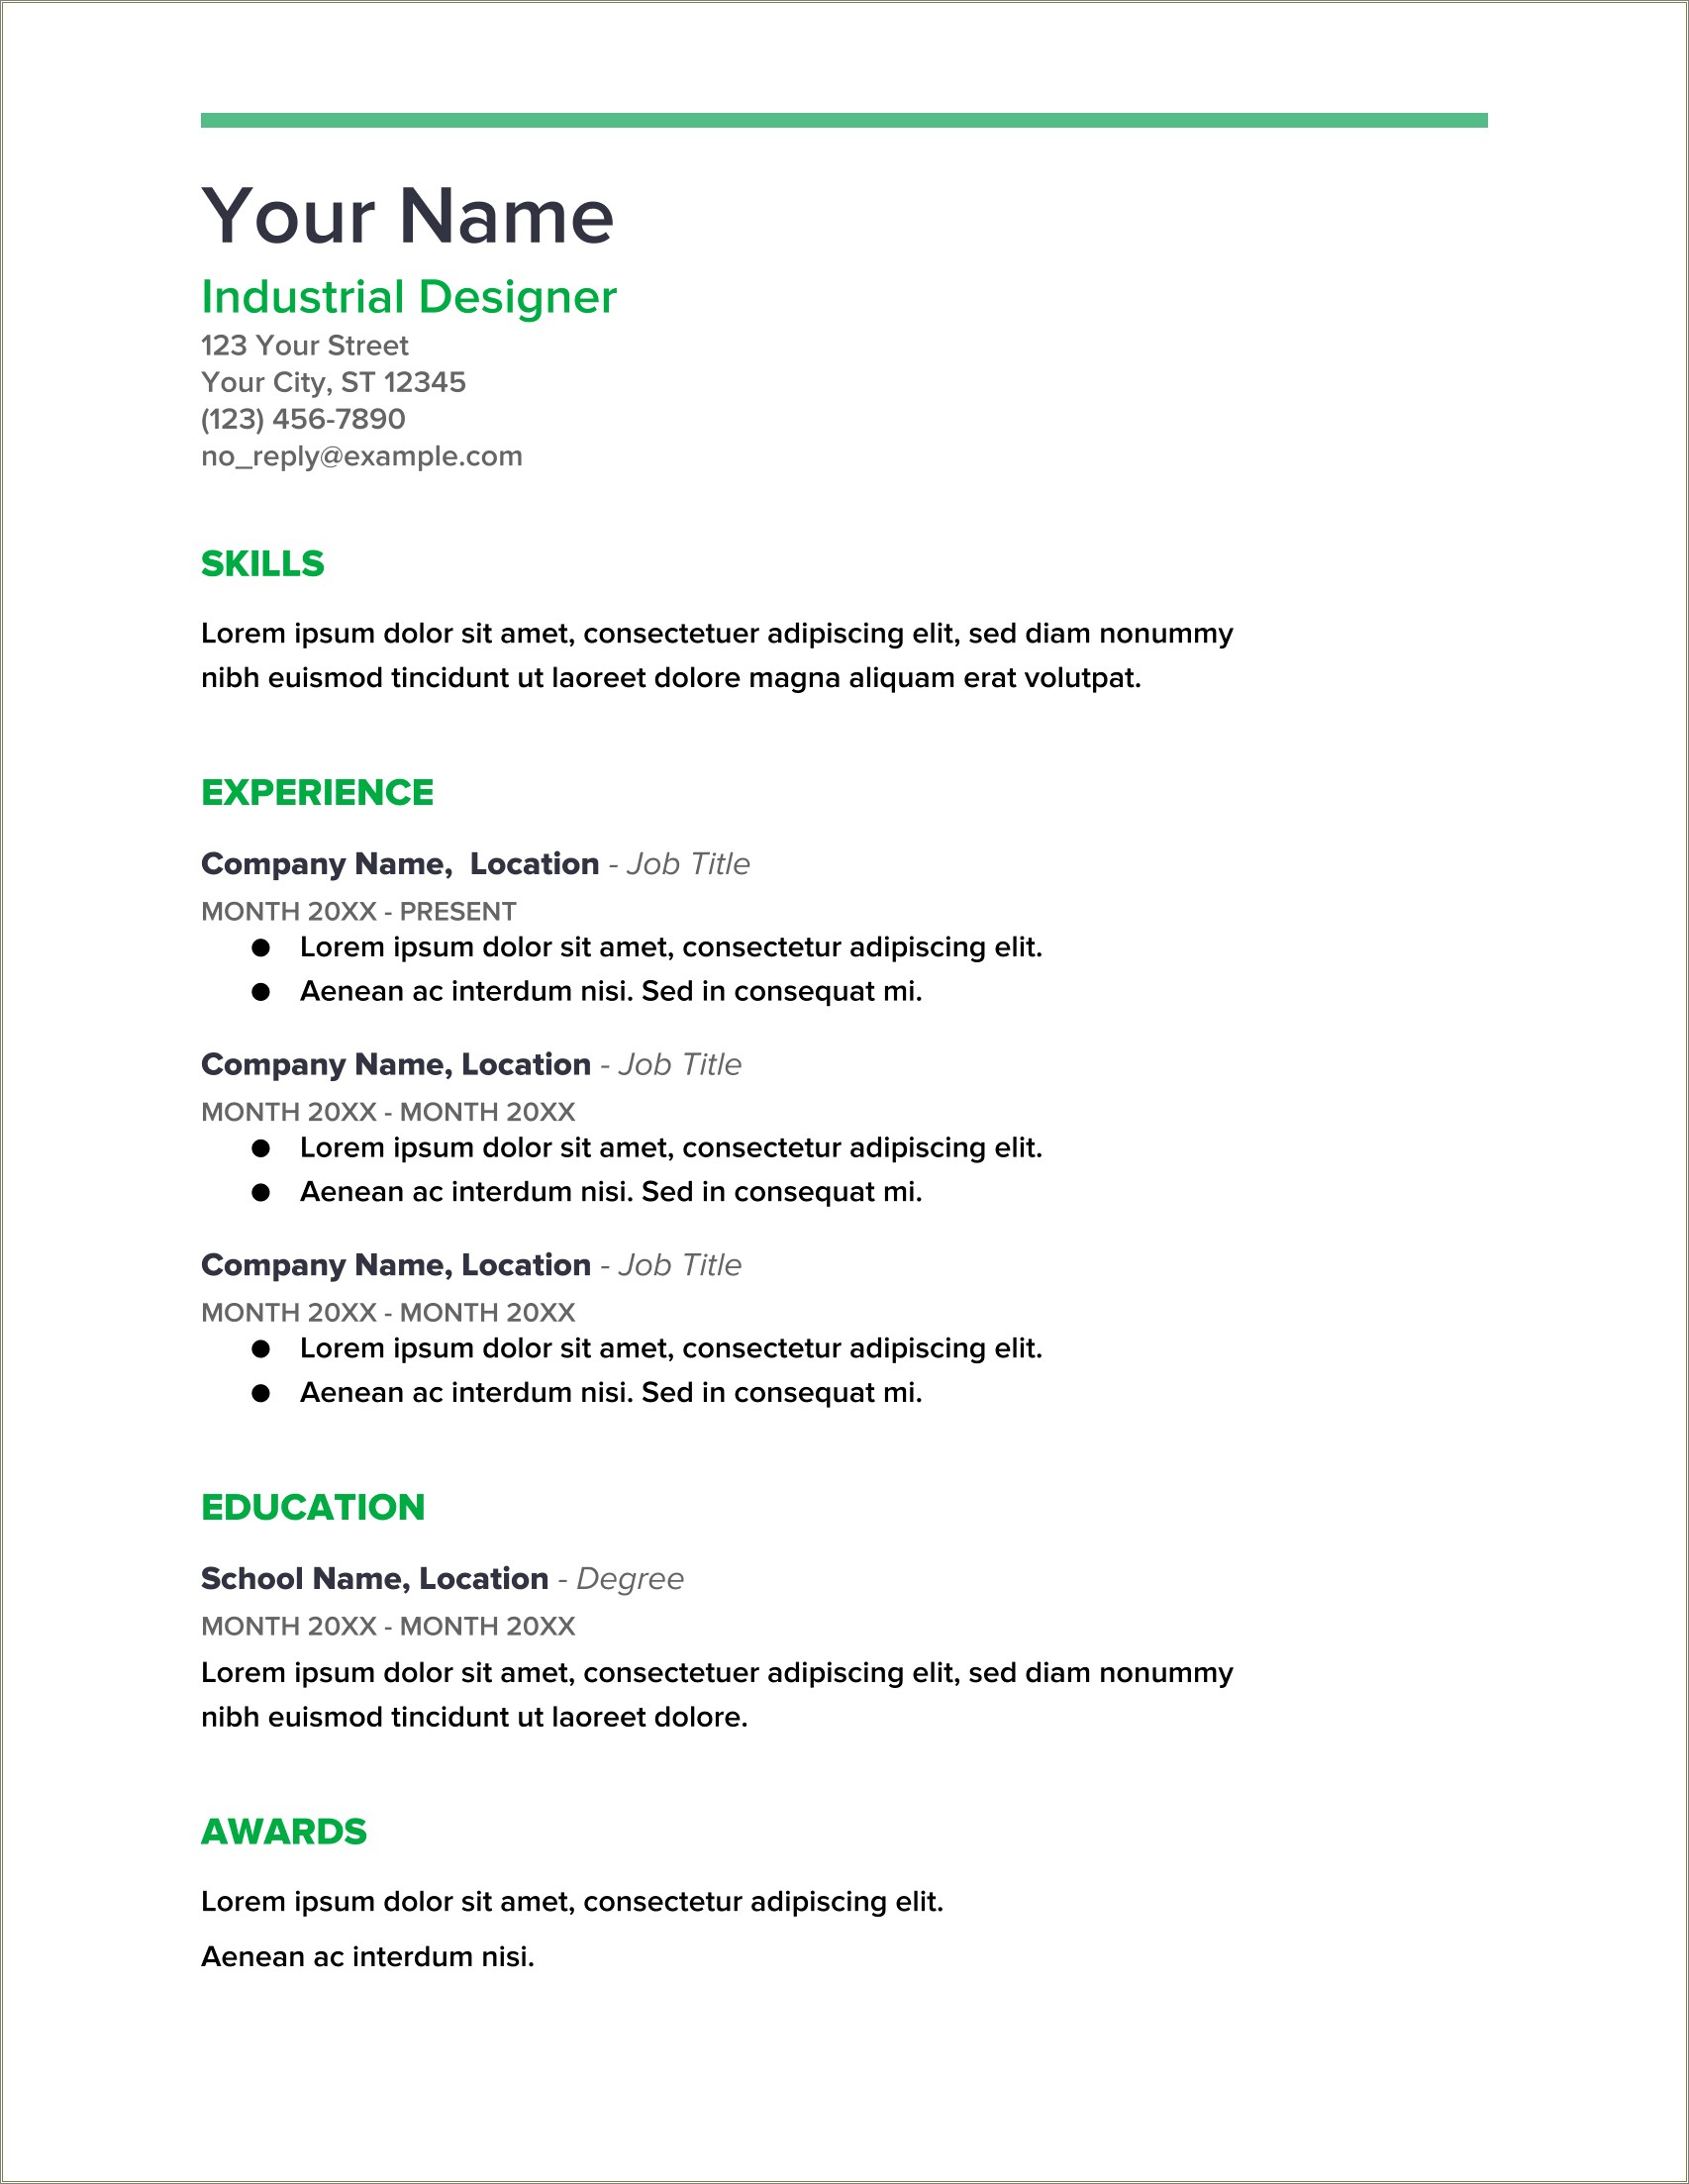 More Resume Templates To Load Into Google Docs